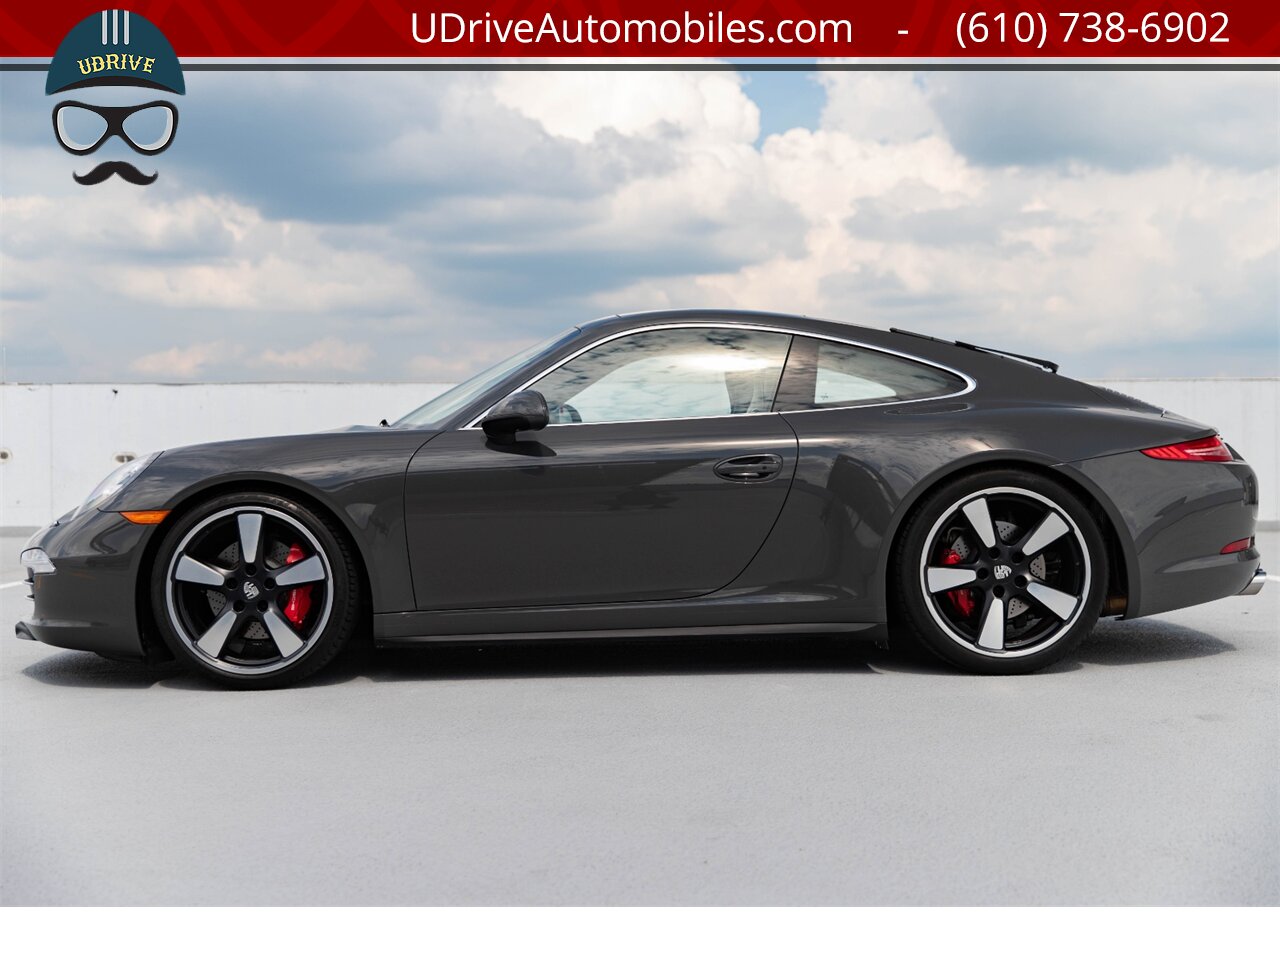 2014 Porsche 911 Carrera S 50th Anniversary Edition Certified  CPO Warranty thru 12/26/21 Full Front End Clear Film - Photo 6 - West Chester, PA 19382